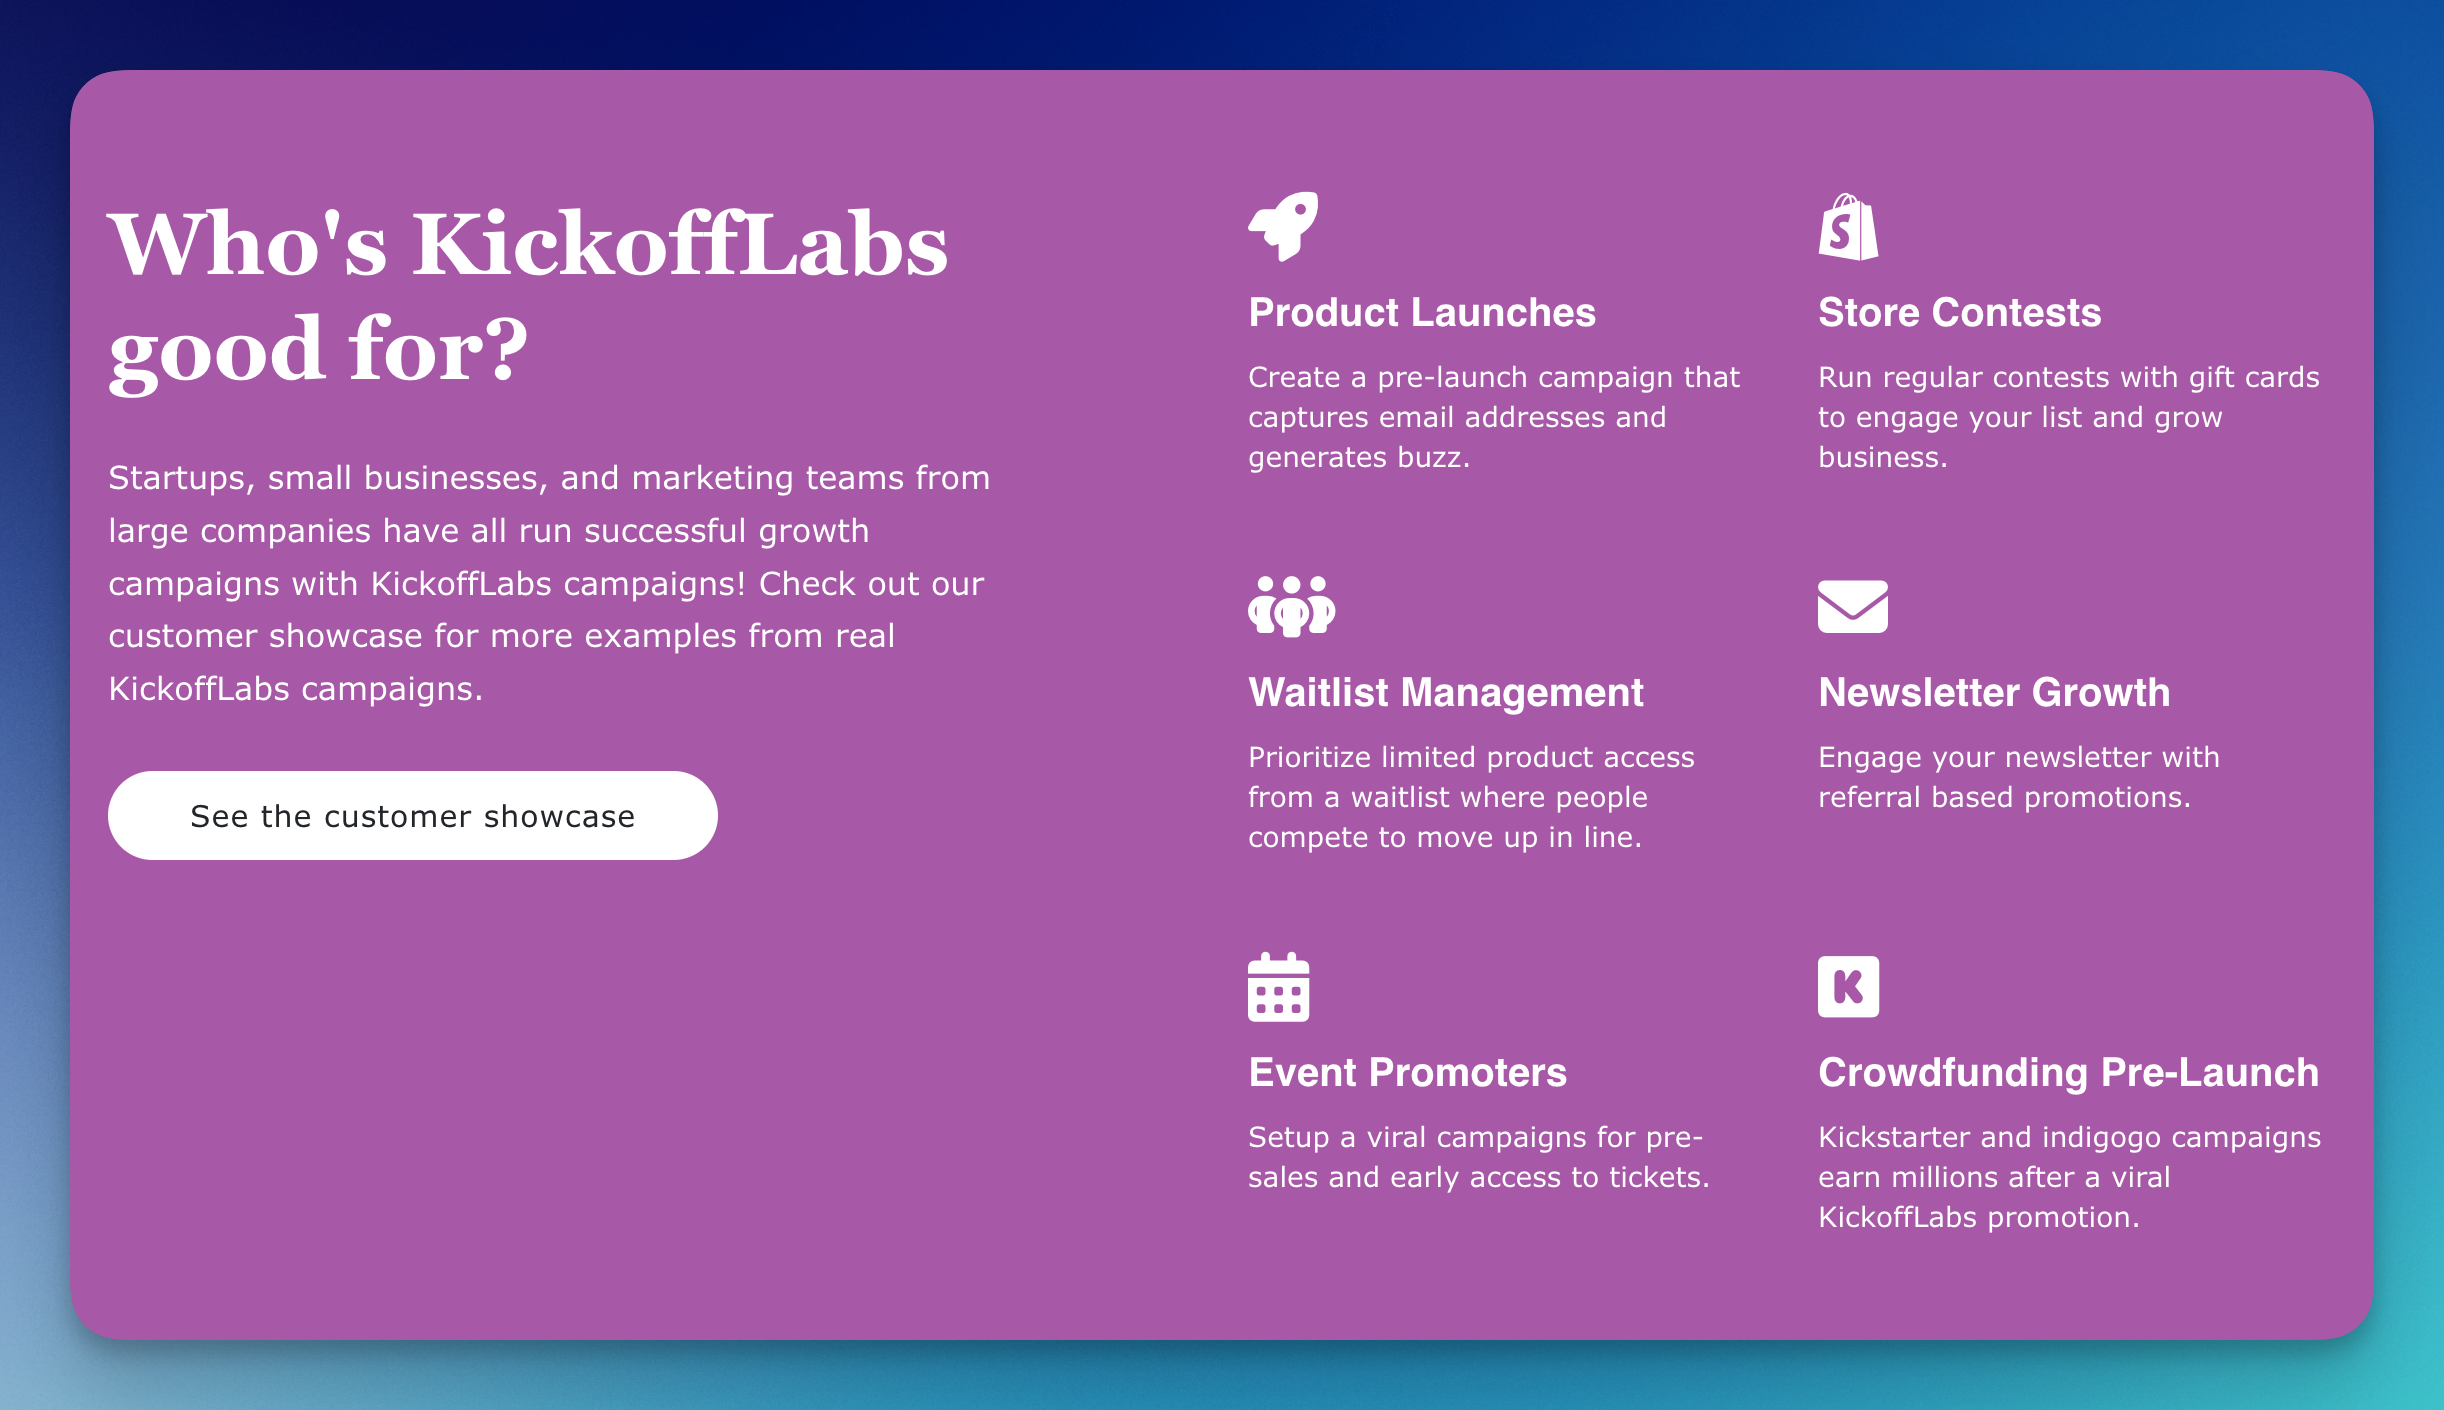 Who's KickoffLabs good for?